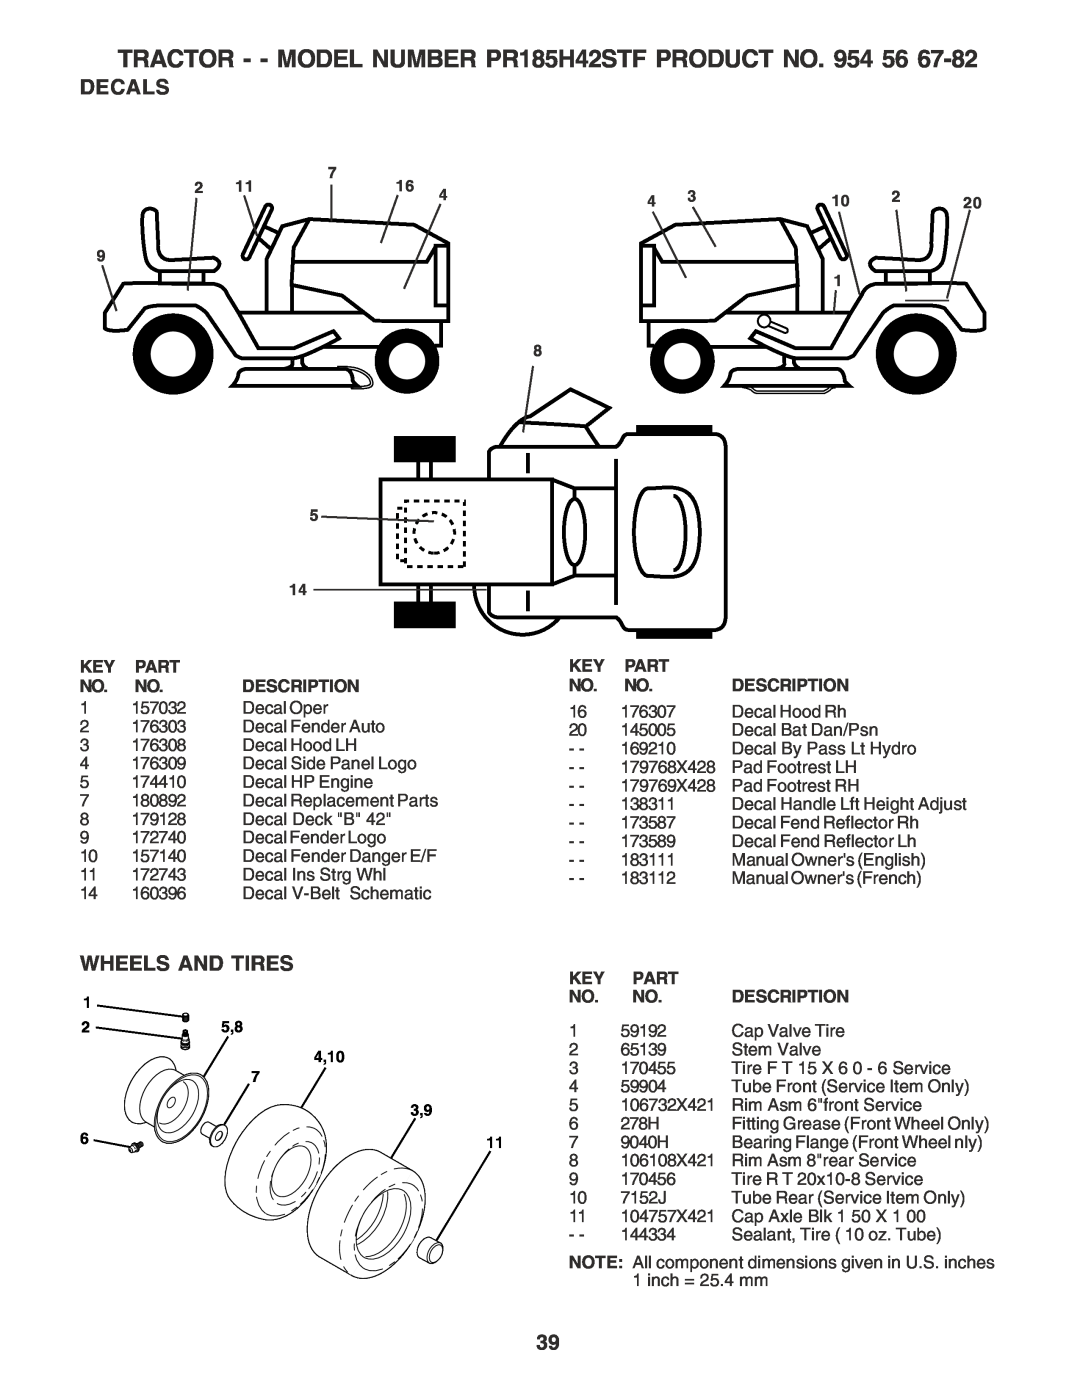 Poulan Decals, Wheels And Tires, TRACTOR - - MODEL NUMBER PR185H42STF PRODUCT NO. 954, Fitting Grease Front Wheel Only 